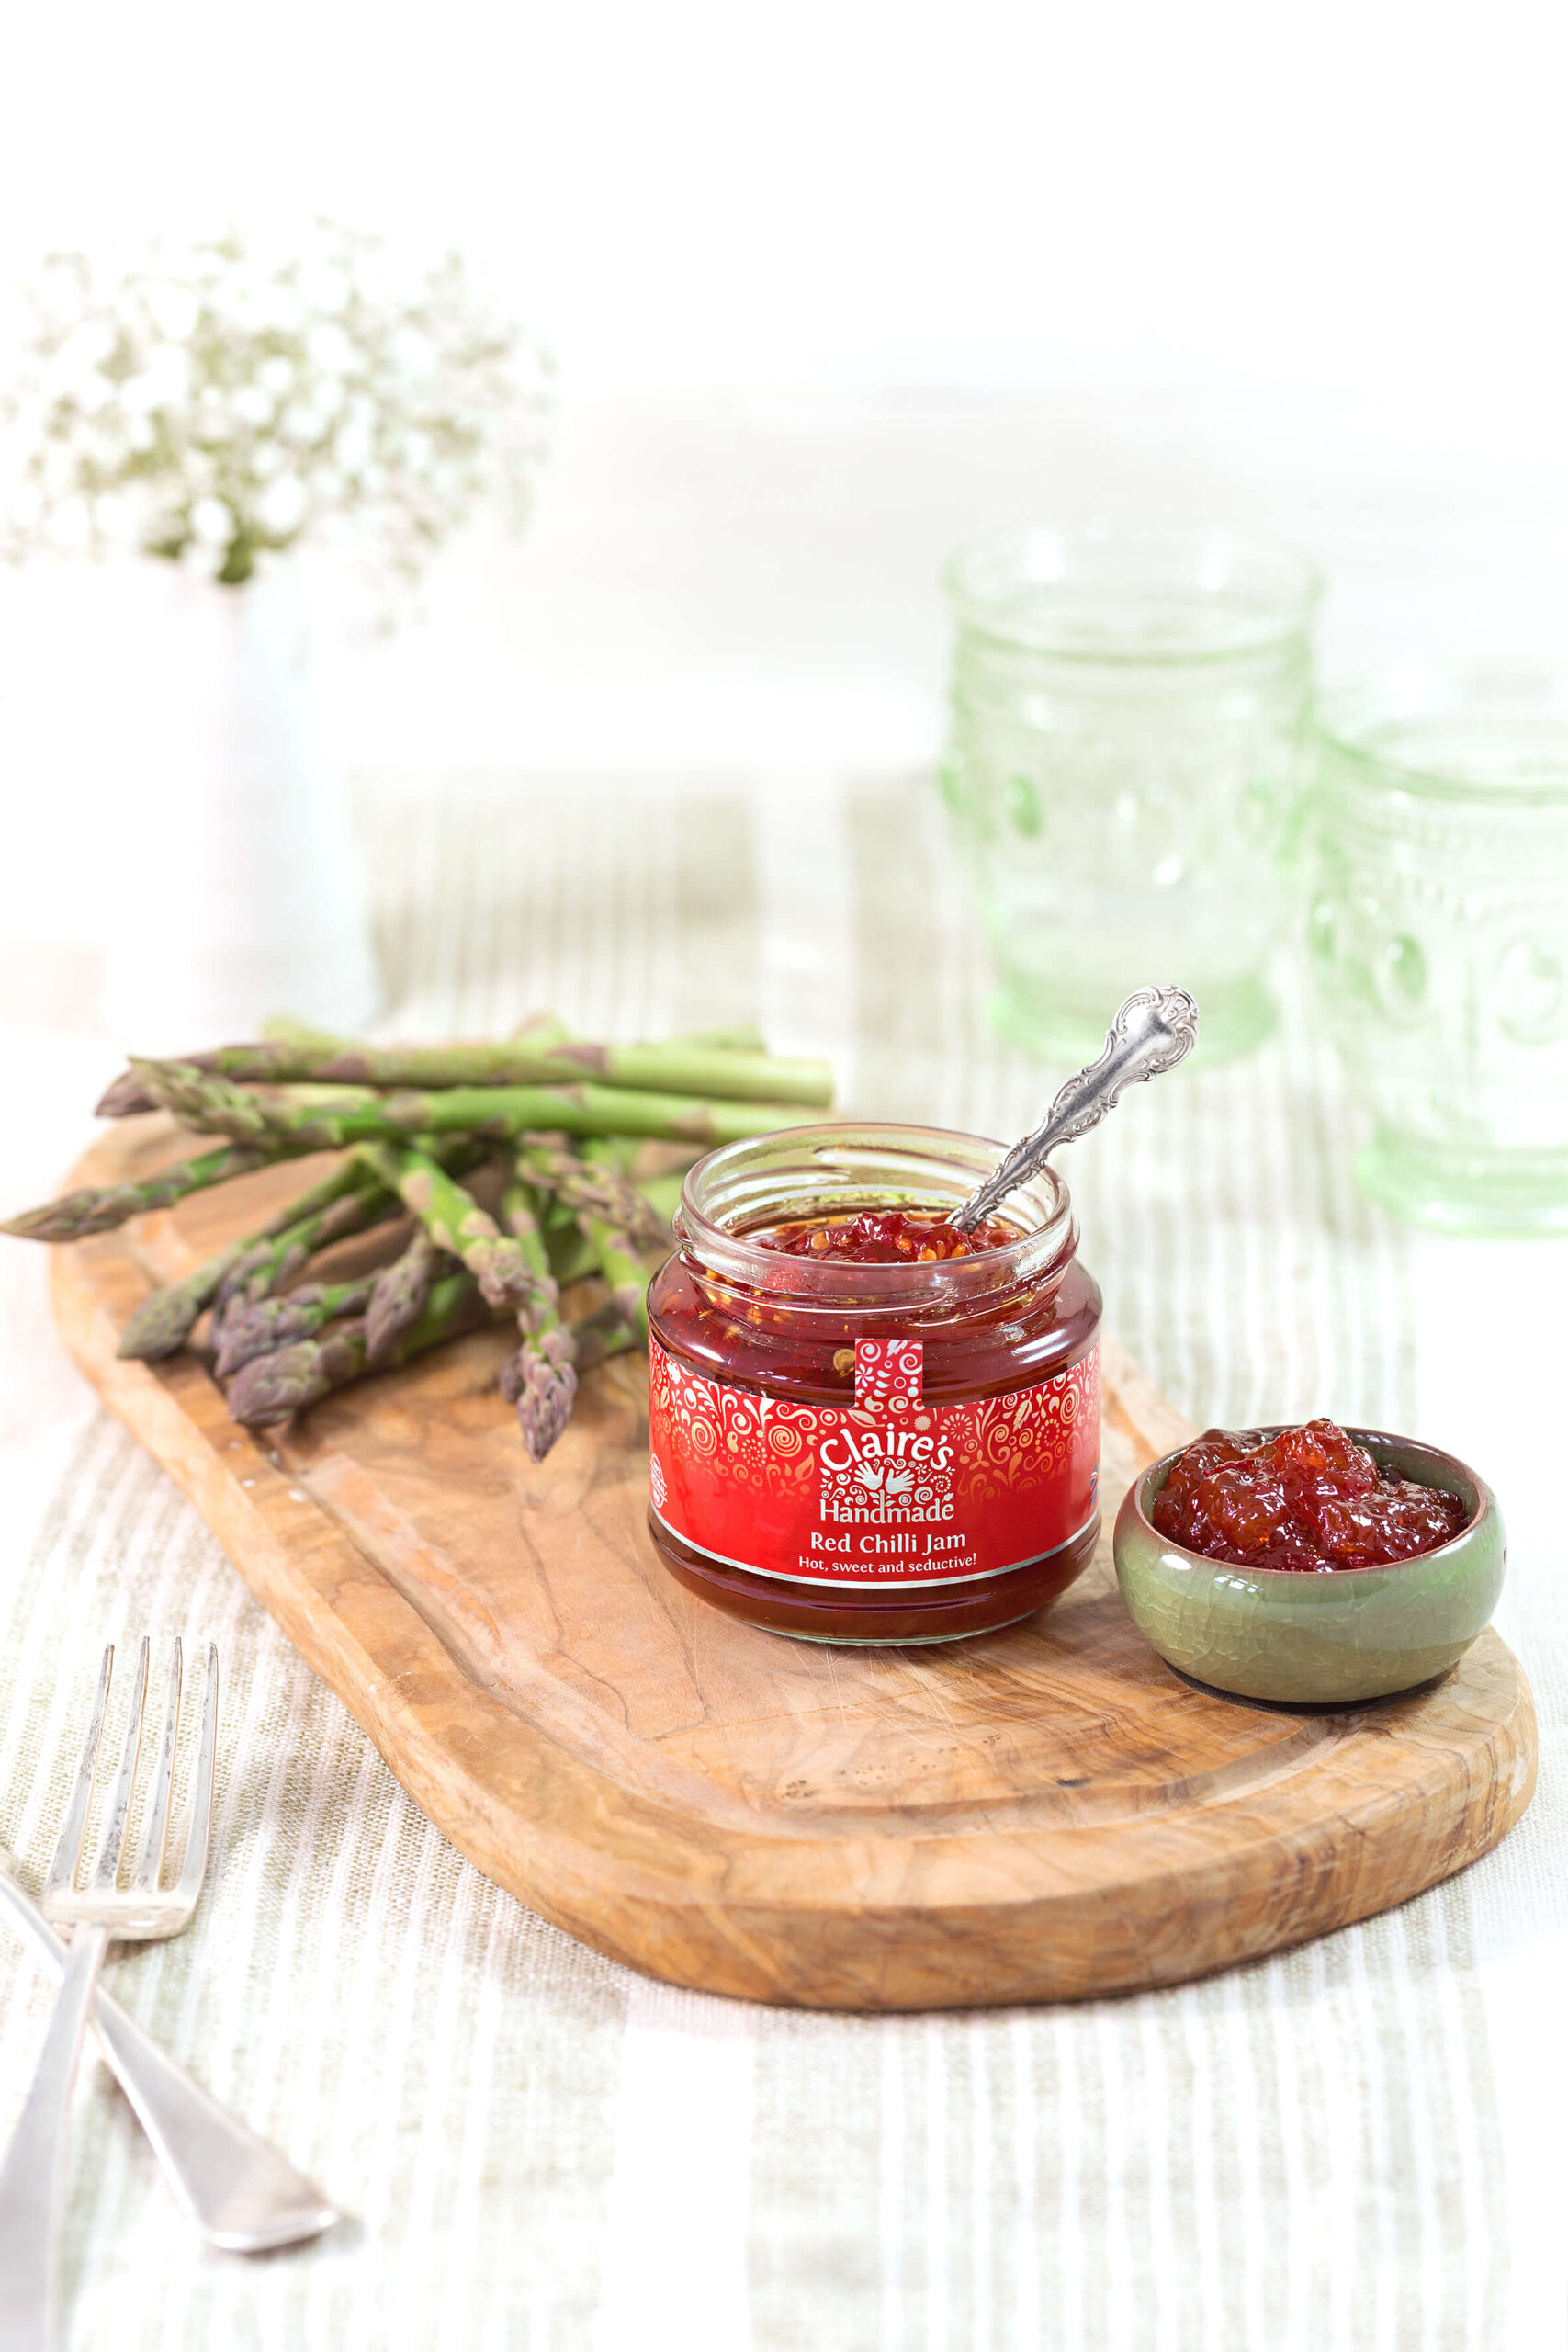 Claire Handmade Red Chilli Jam and asparagus